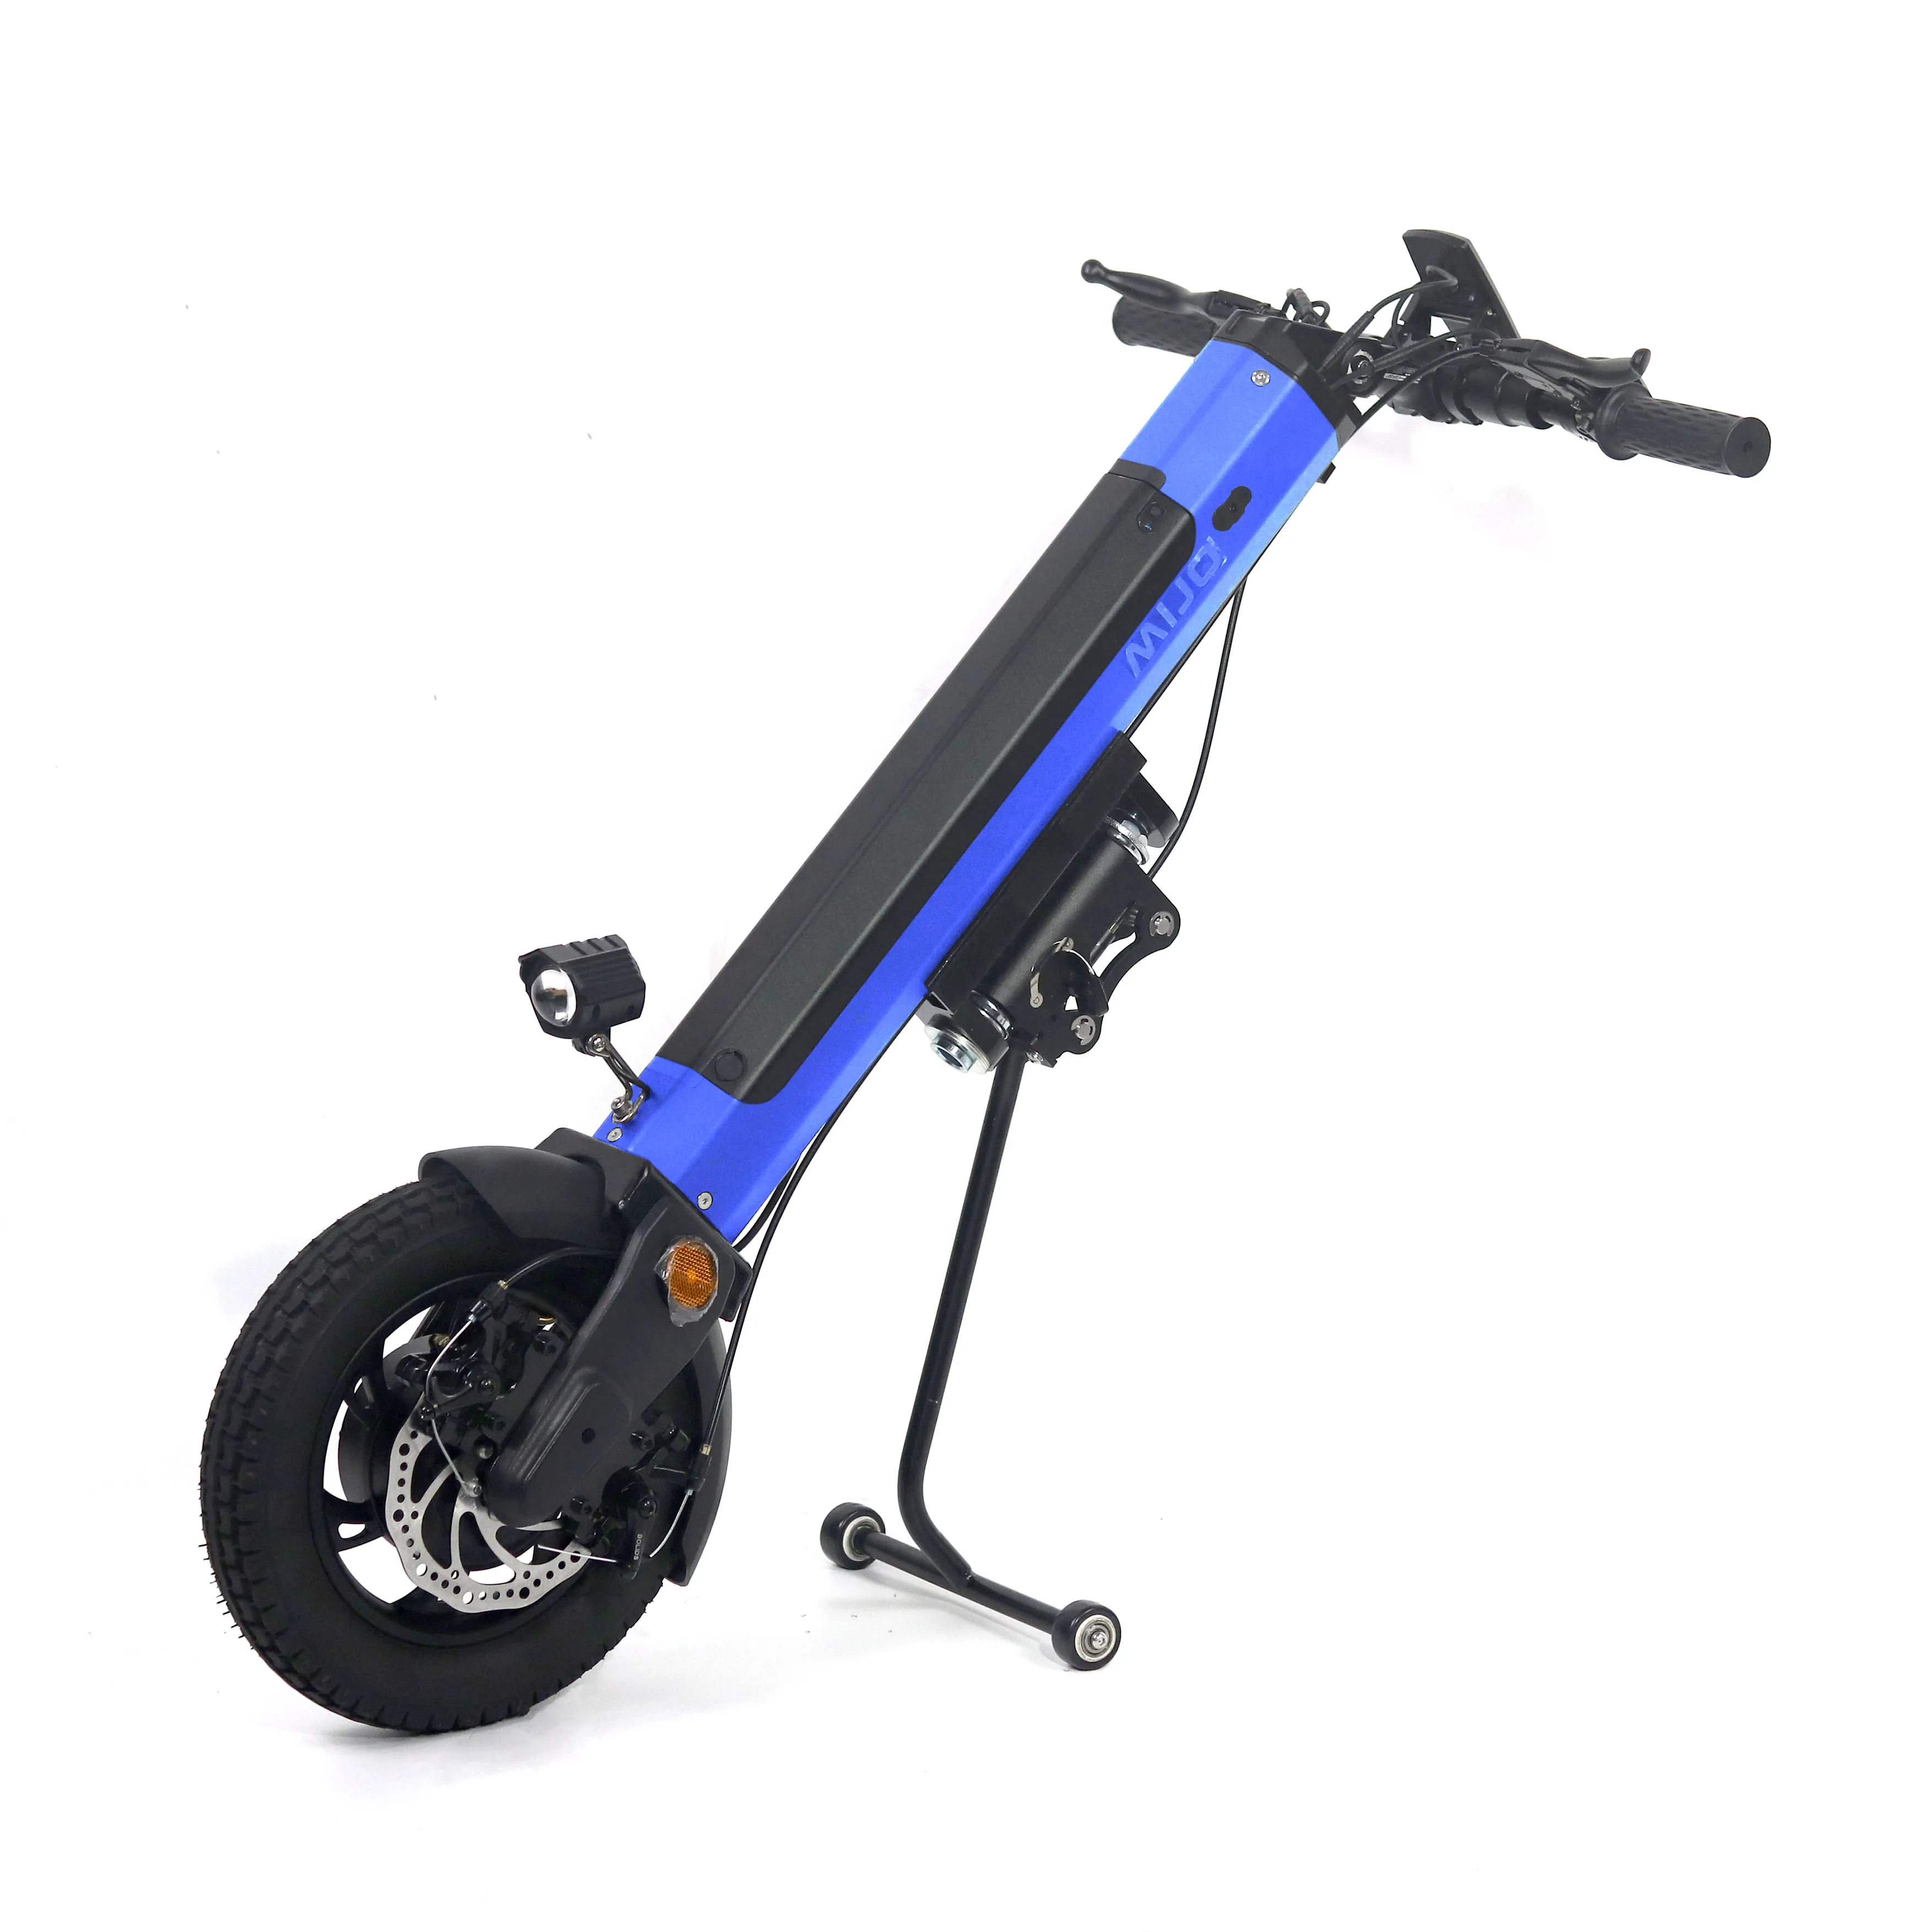 Portable and Comfortable Electric Handcycle Wheelchair Attachment 350W Wheelchair Drive Head with 36V 13Ah Lithium battery 48v 350w 500w motor electric handcycle tractor with 8ah 16ah lithium battery range 65 km